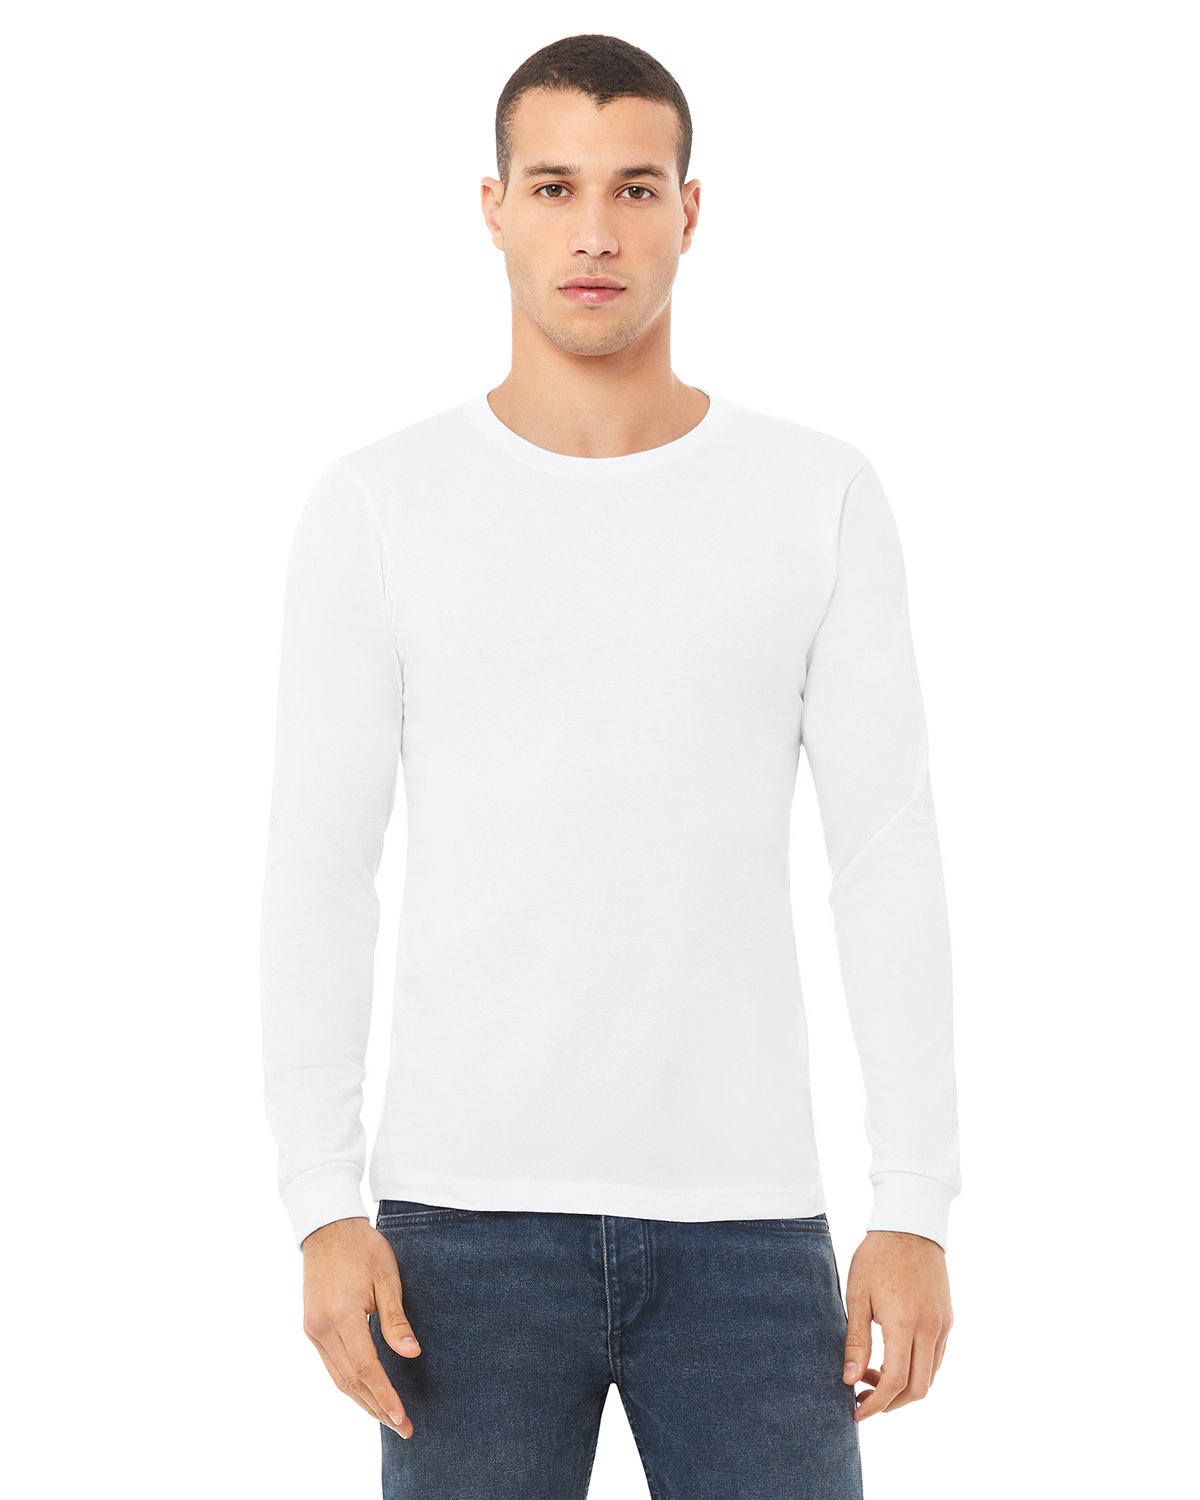 Front view of Unisex Jersey Long-Sleeve T-Shirt